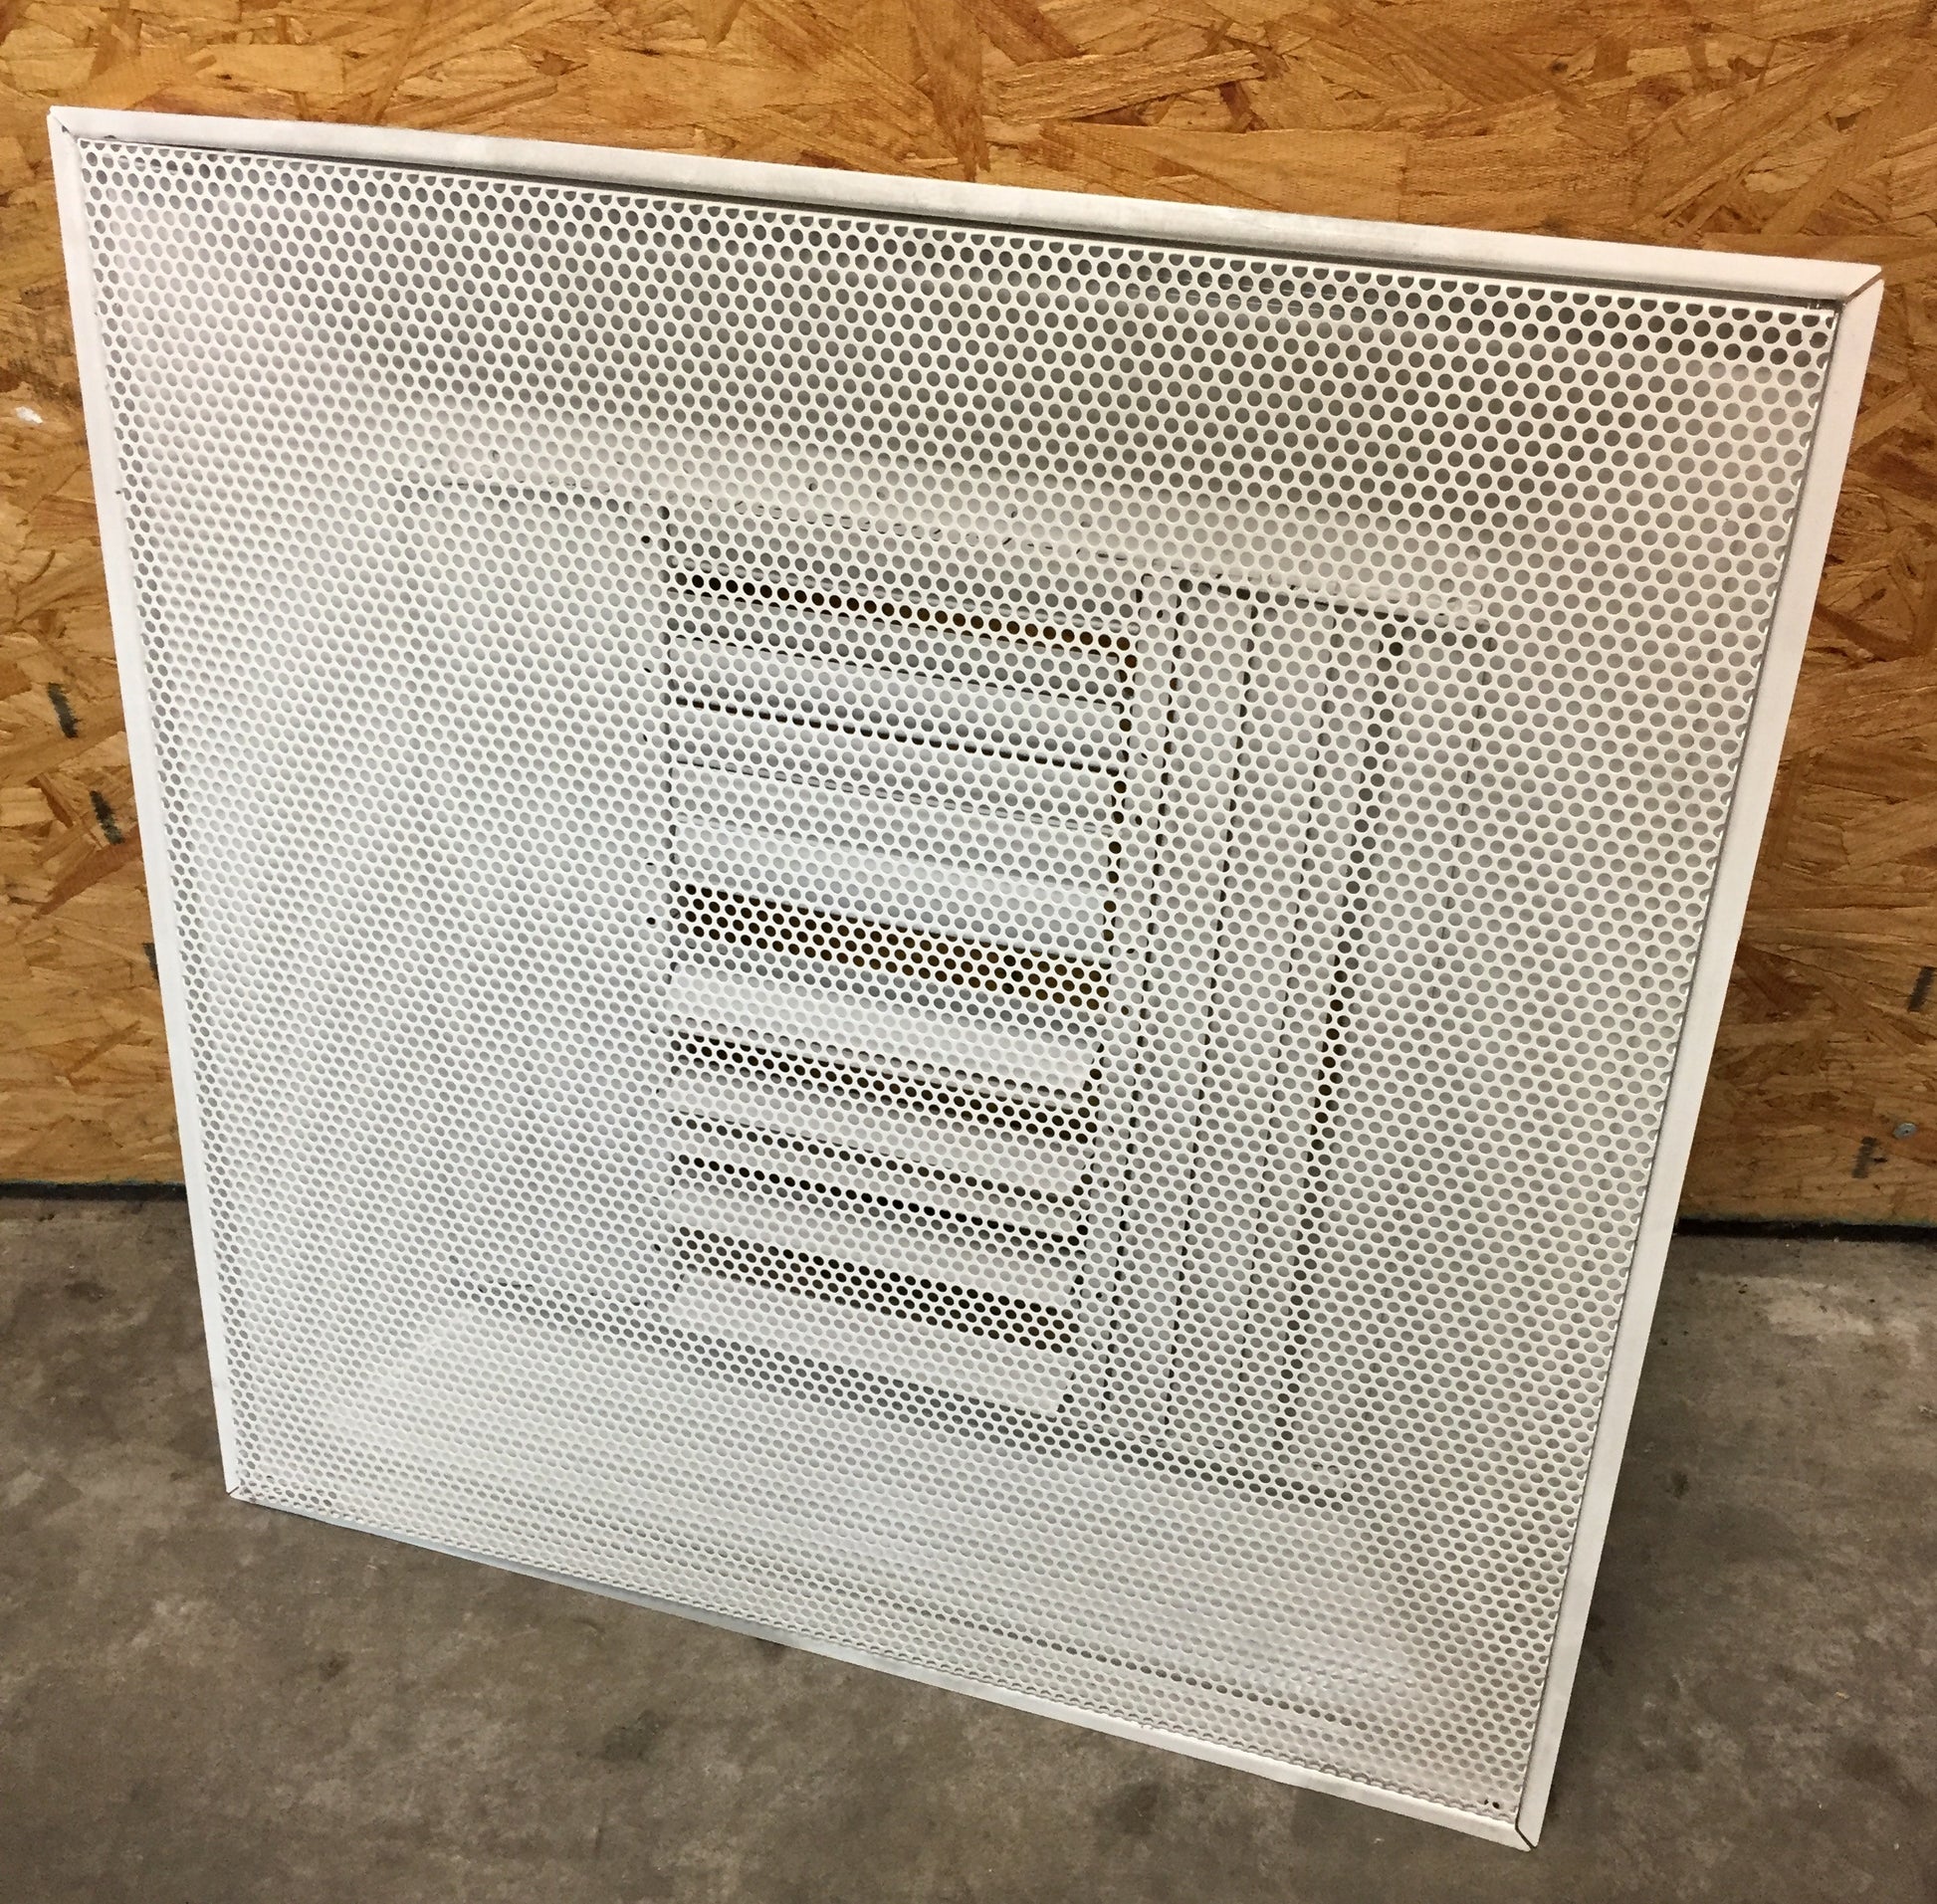 24" x 24" Perforated Diffuser PV Series Adjustable Curved Blade with 14" Neck